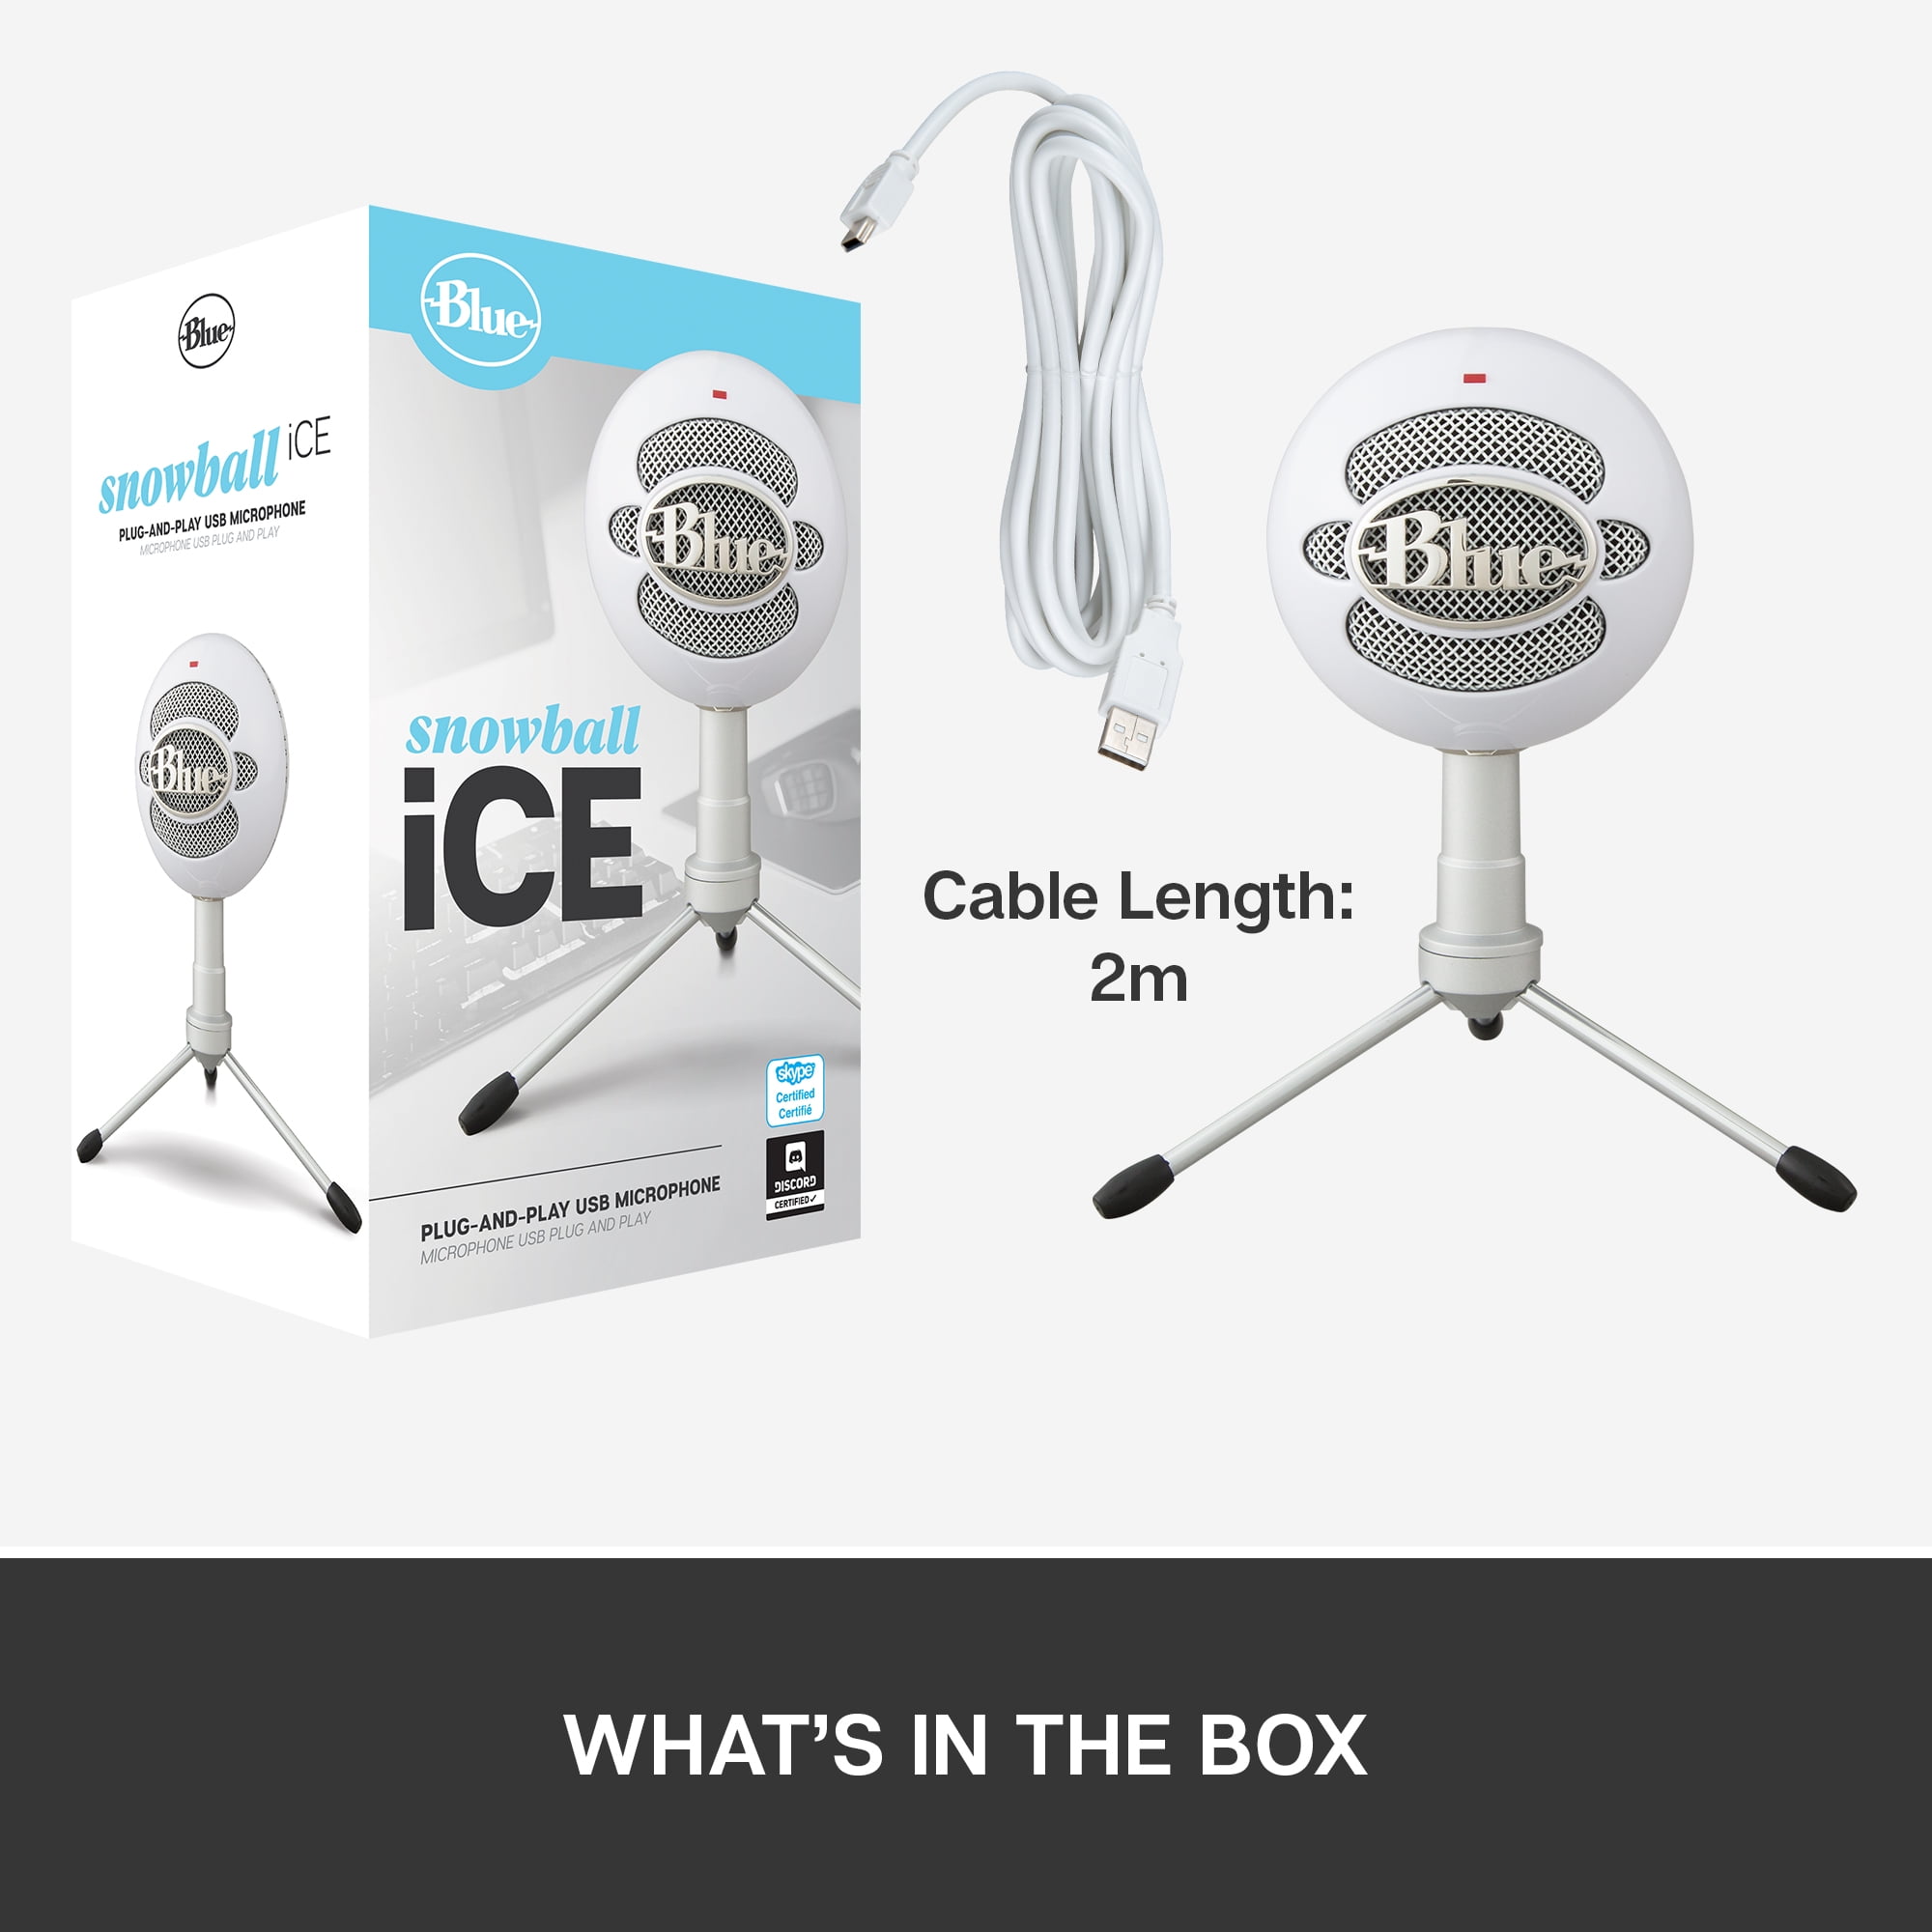 Blue iCE Plug Play USB Microphone for Recording, Streaming, Podcasting, Gaming on PC and Mac, with Cardioid Condenser Capsule, Adjustable Desktop Stand and USB cable, White Walmart.com